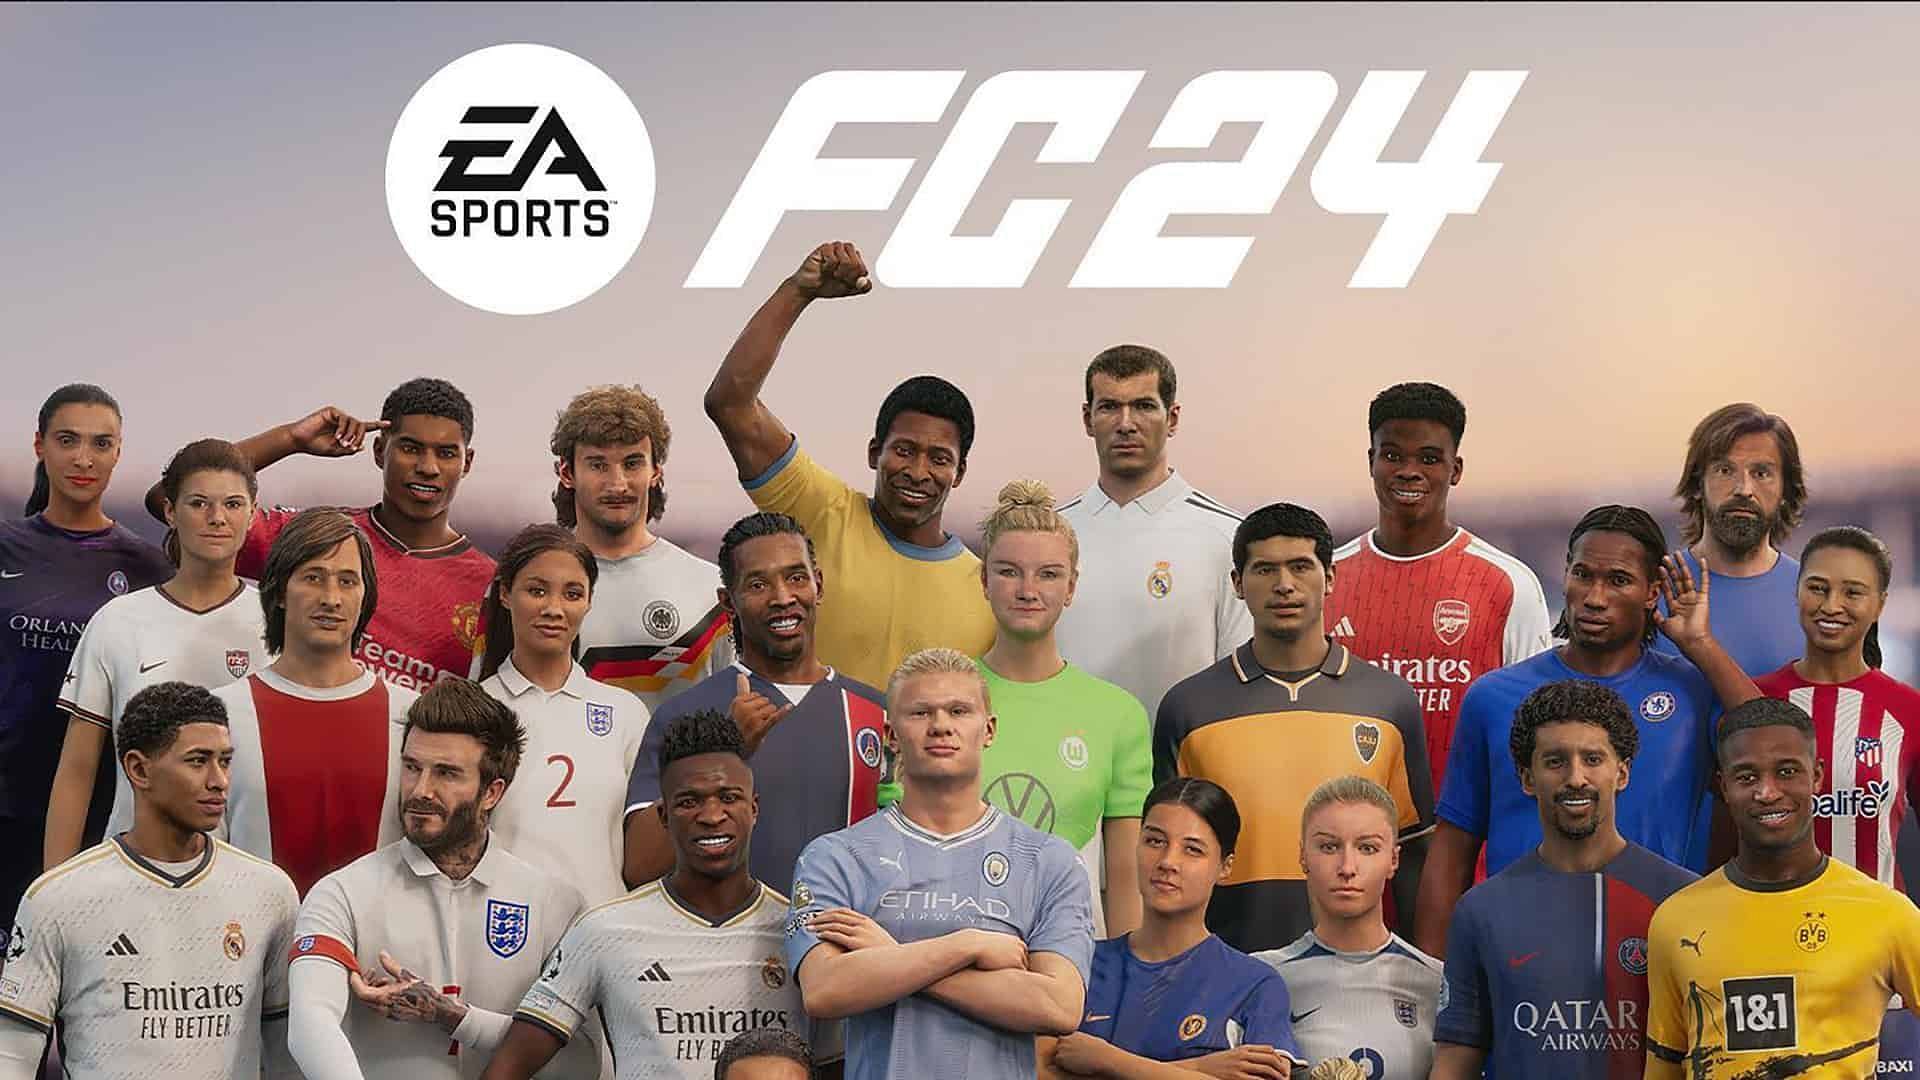 EA FC 24 Web App Release Time Today - Live Update : r/FifaUltimateTeam_NEWS